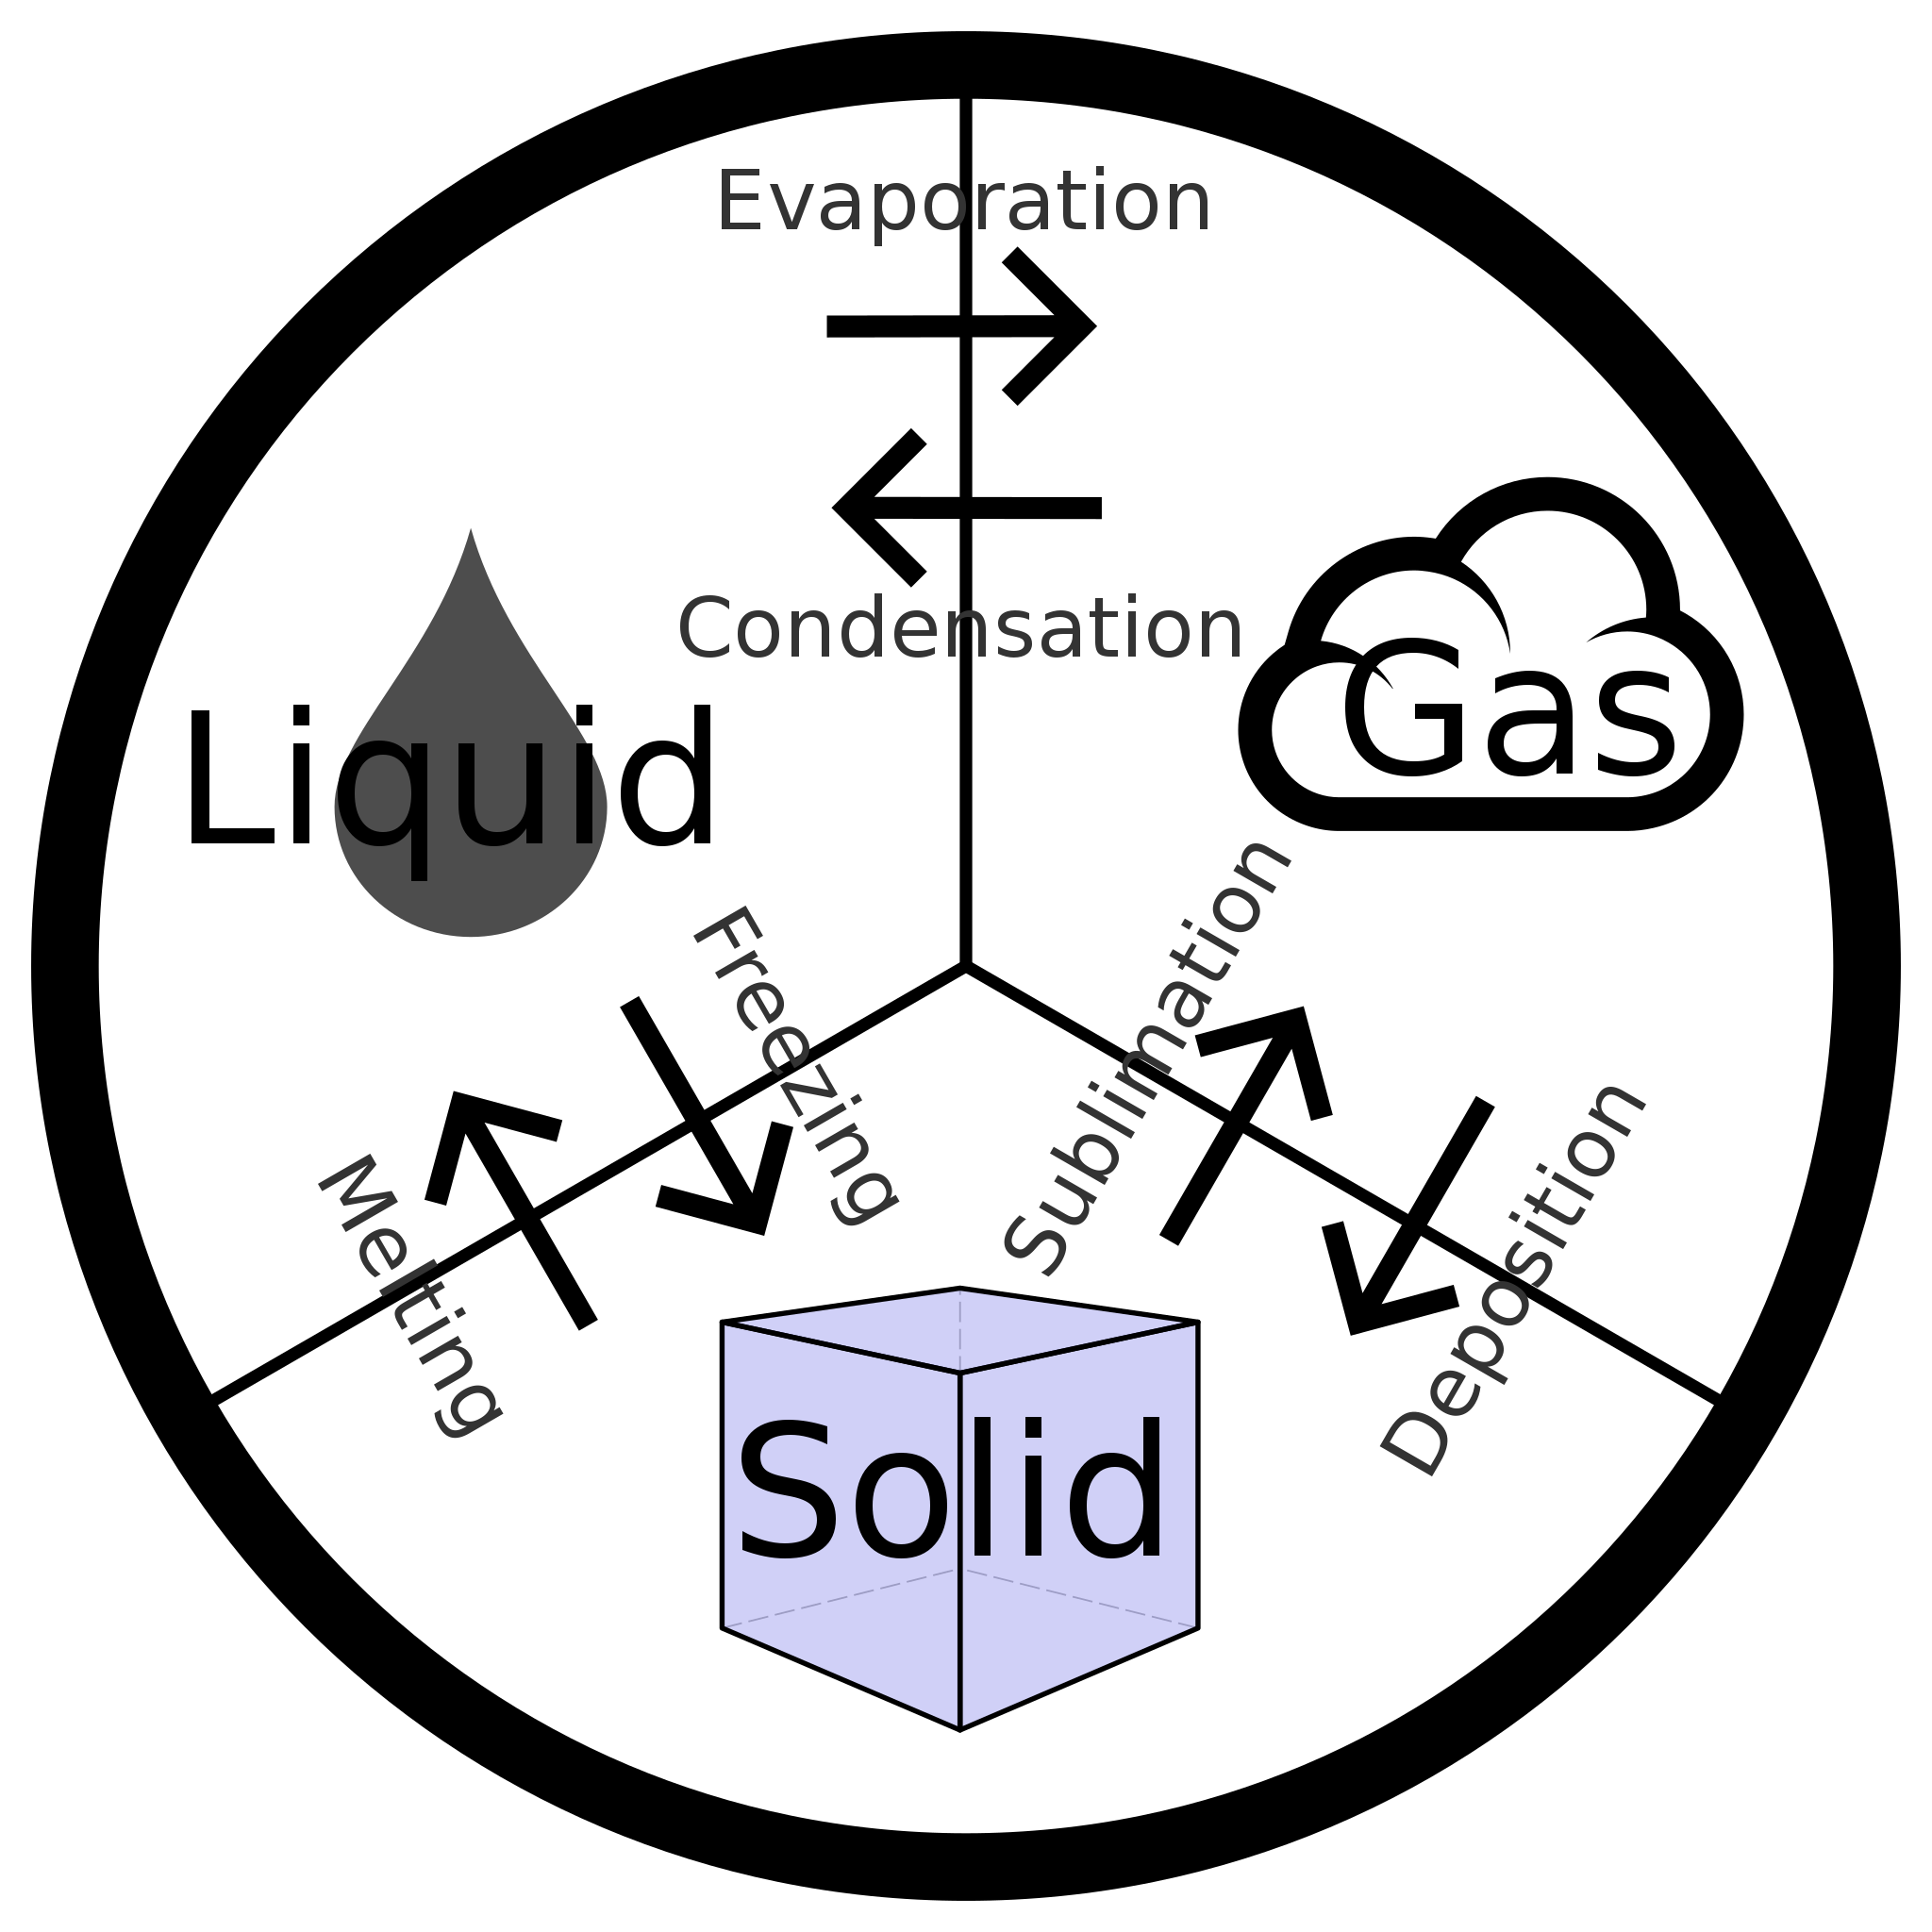 The Phase Change Diagram shows the following: Condensation changes a gas to a liquid. Evaporation changes a liquid to a gas. Freezing changes a liquid to a solid. Melting changes a solid to a liquid. Sublimation changes a solid to a gas; whereas, deposition changes a gas to a solid.